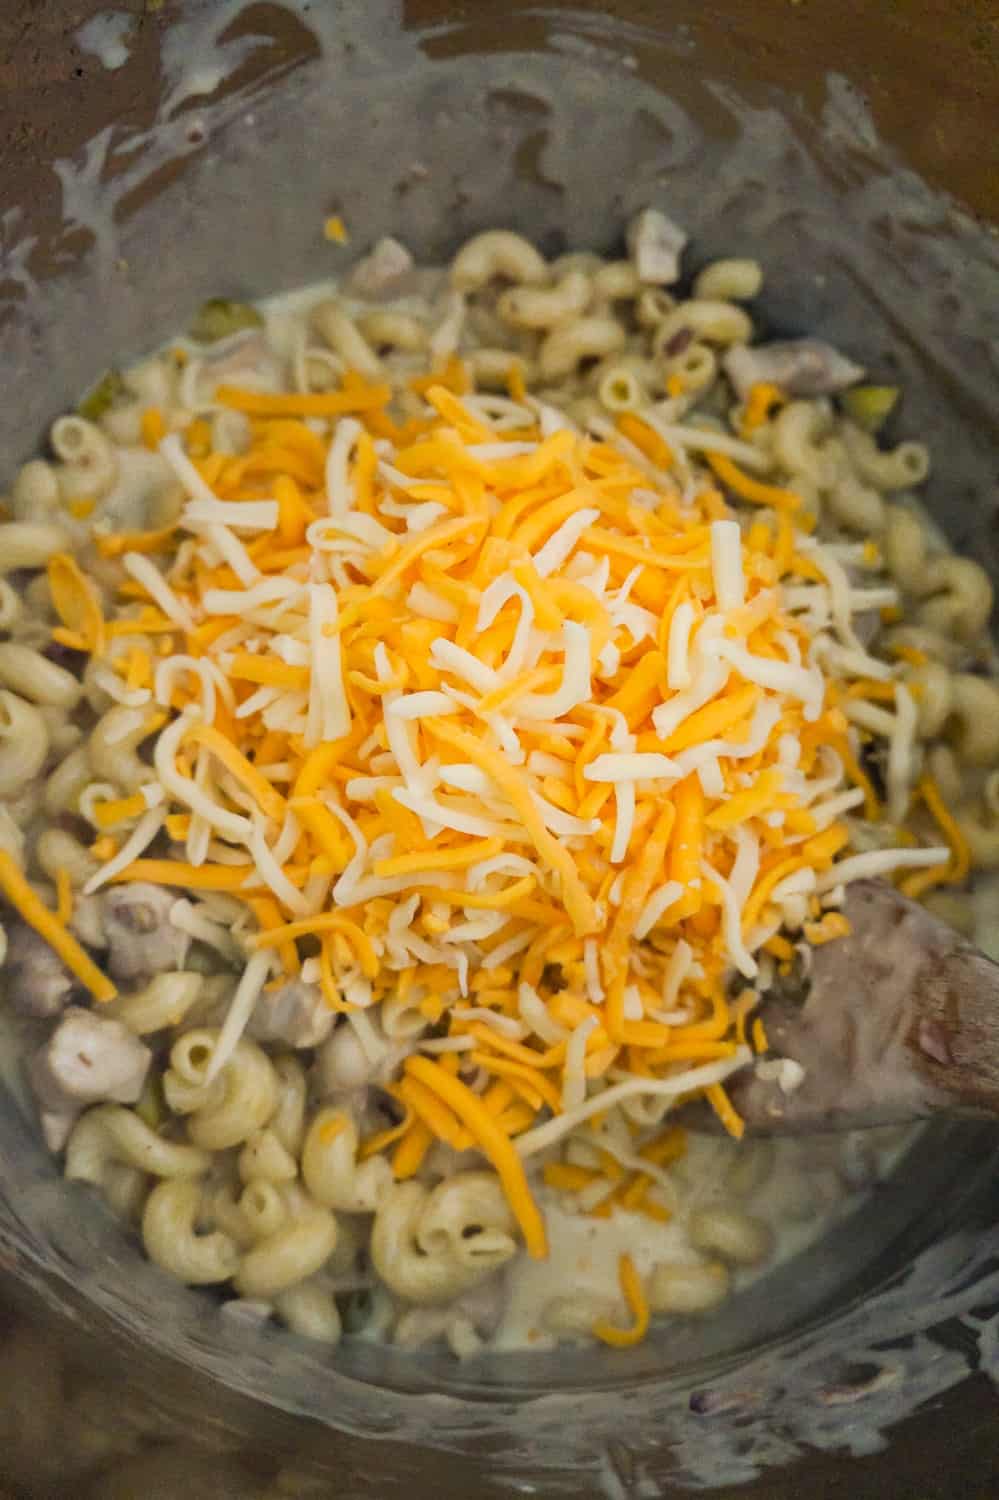 shredded cheddar and mozzarella on top of pasta in an Instant Pot